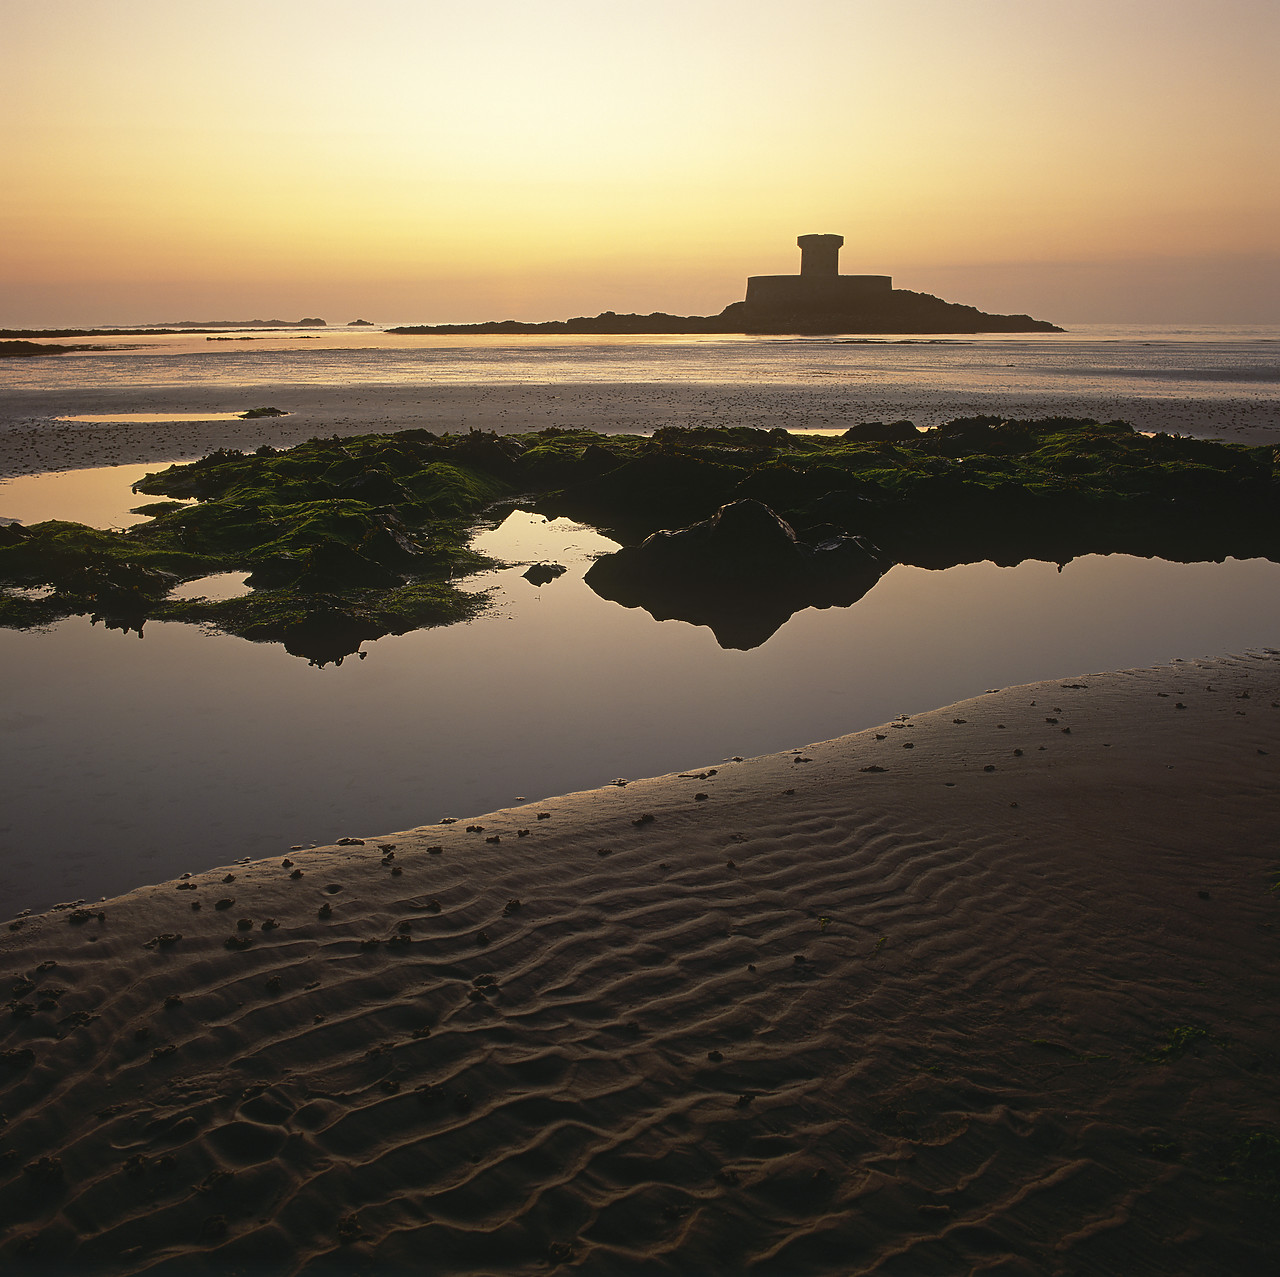 #934488-1 - La Rocca Tower at Sunset, Jersey, Channel Islands